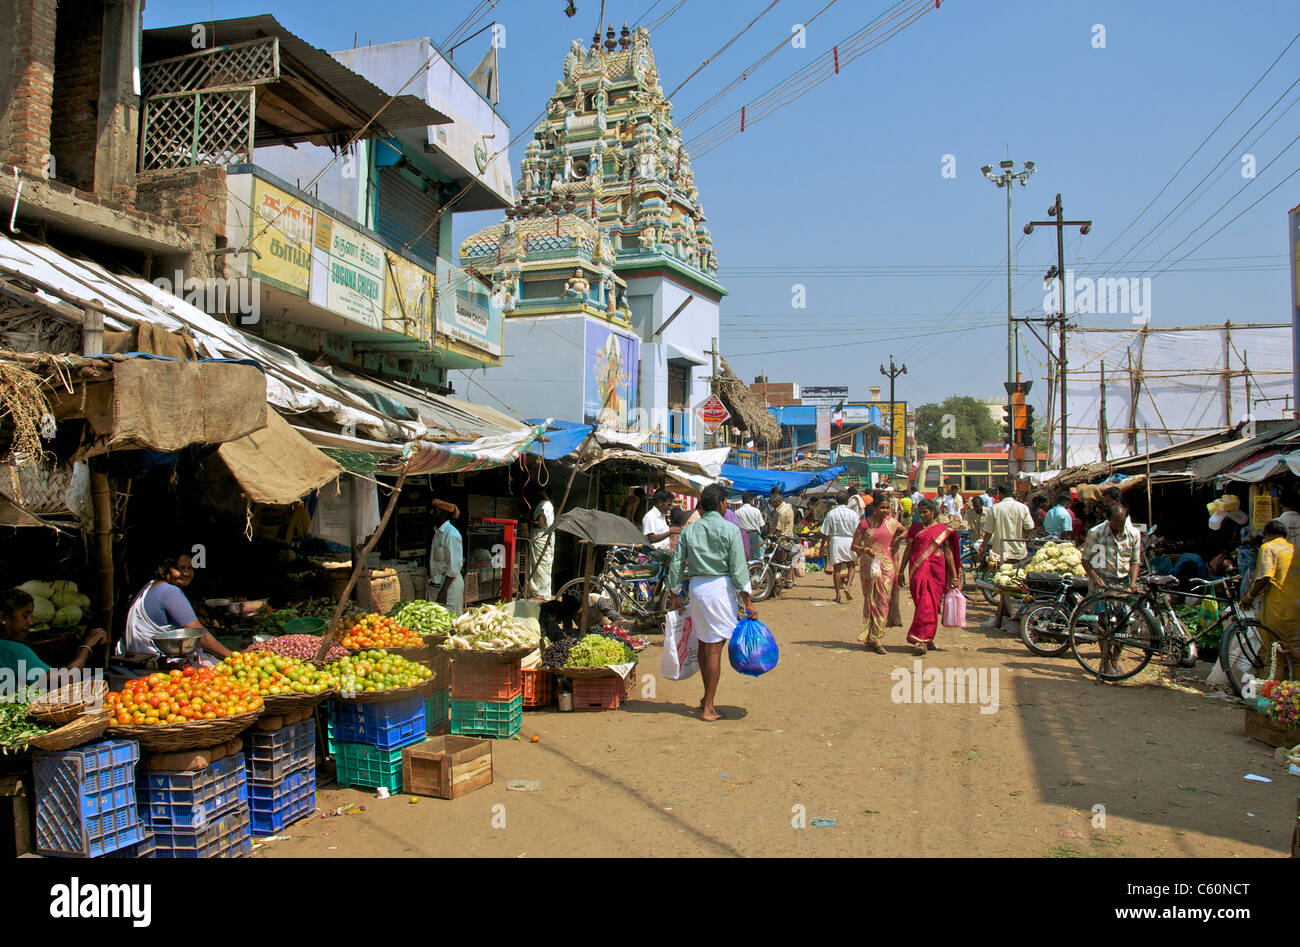 Fruit and vegetable market Tamil Nadu South India Stock Photo